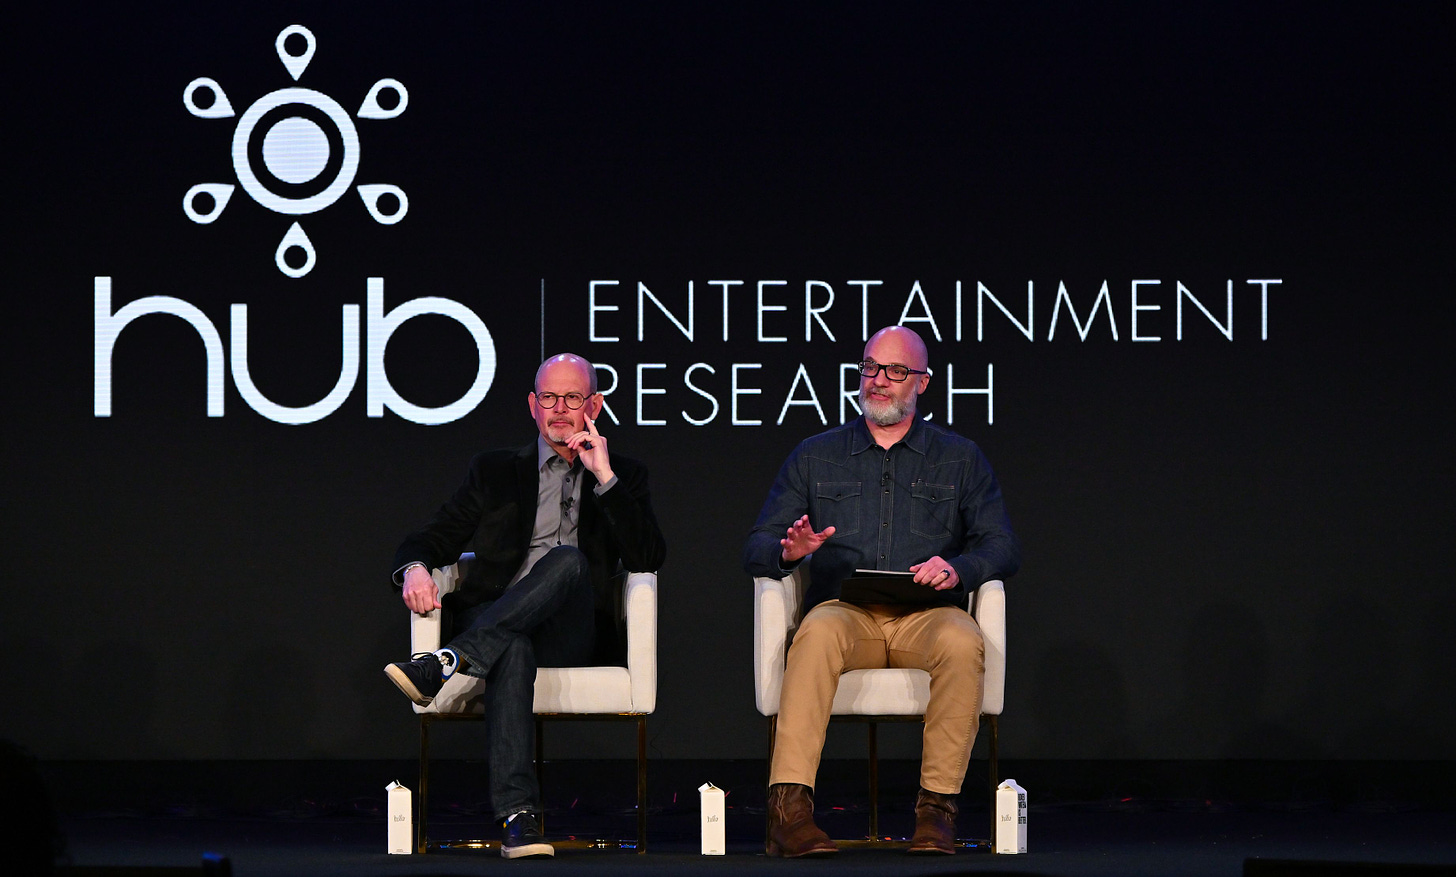 Mark Loughney (left) and Jon Giegengack (right) talking about the state of streaming at the TCA Winter Press Tour. (Photo credit: Rob Latour/Shutterstock)